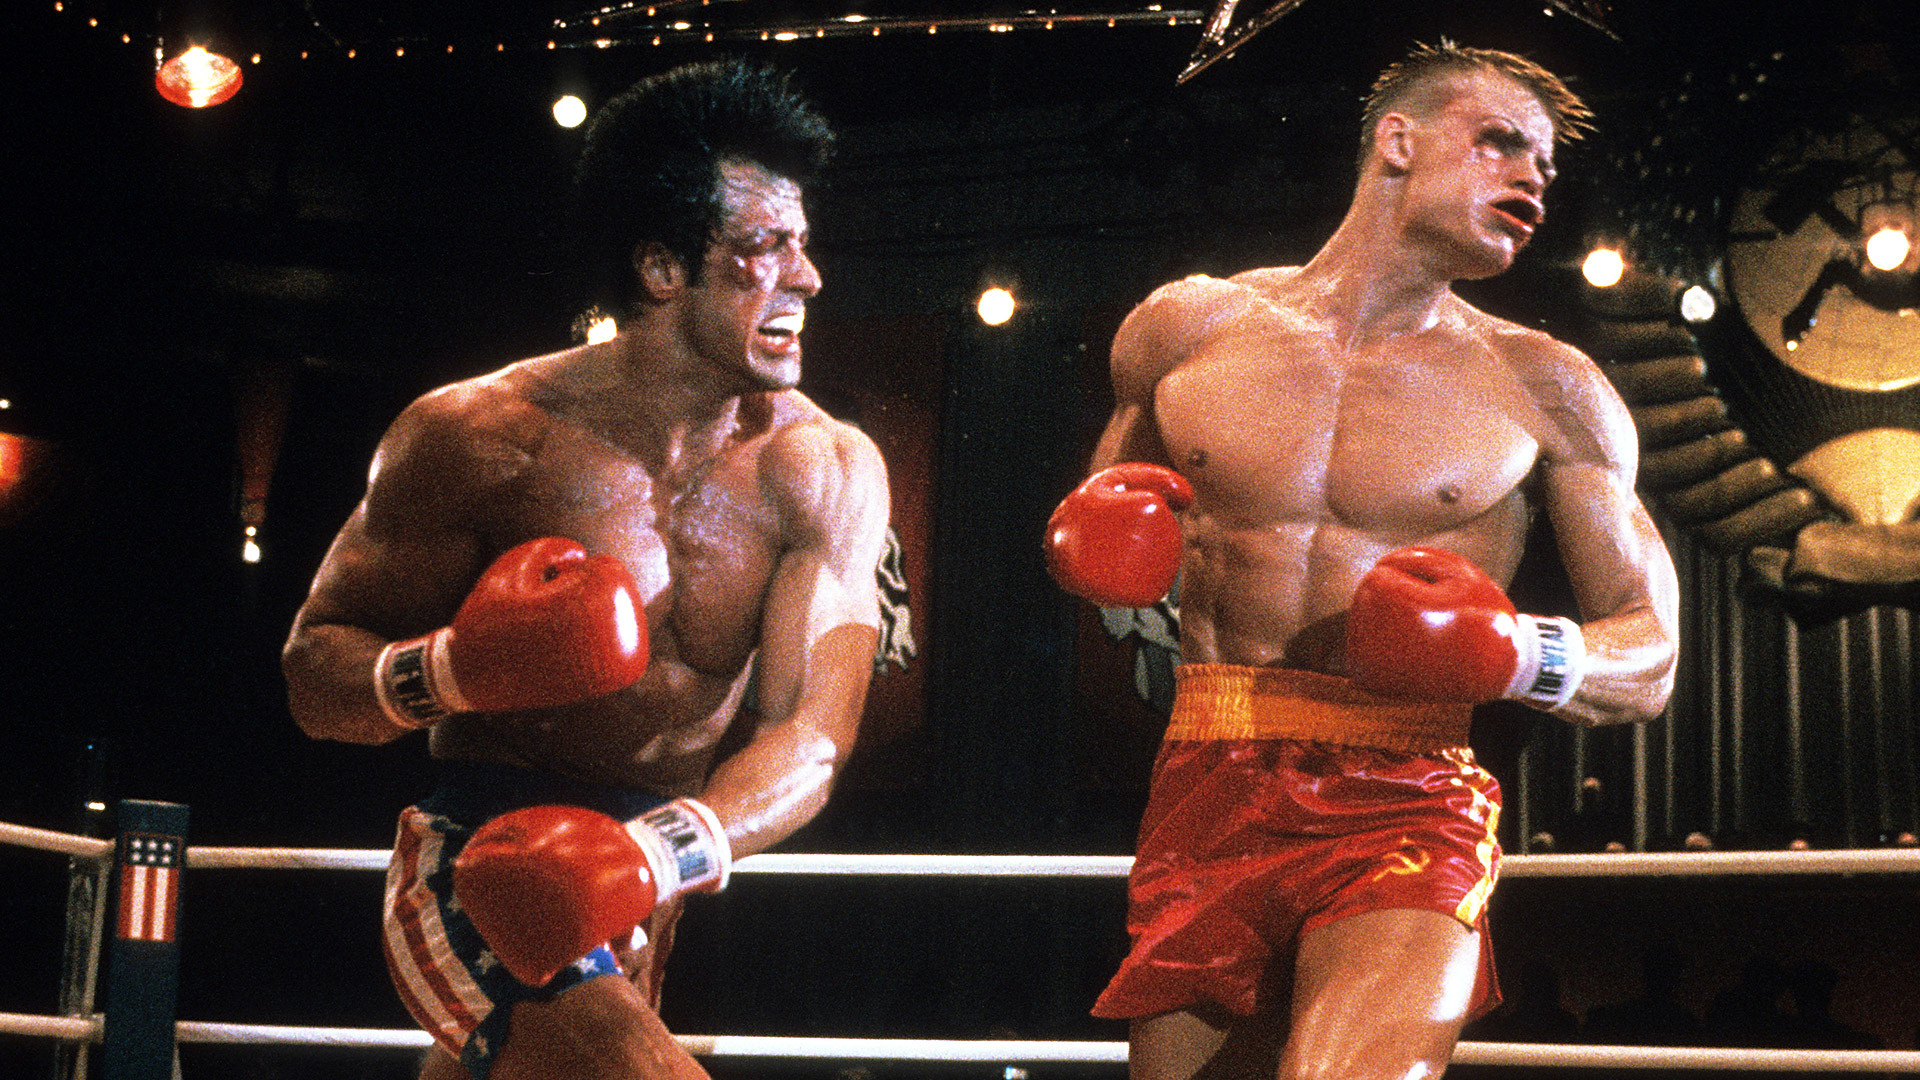 Stallone punches Dolph Lundgren in a scene from the film 'Rocky IV', 1985.